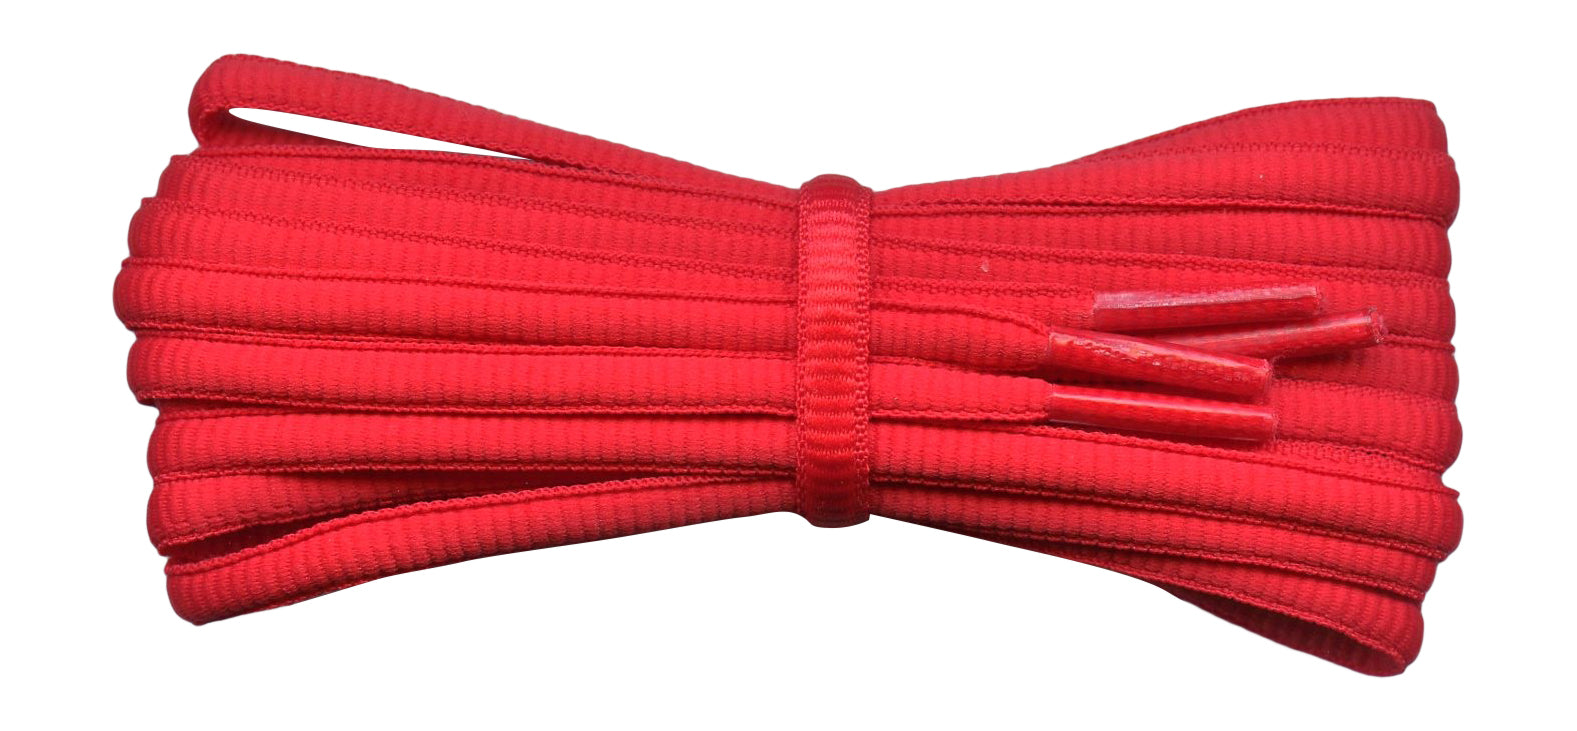 Fabmania oval sports shoe laces in red